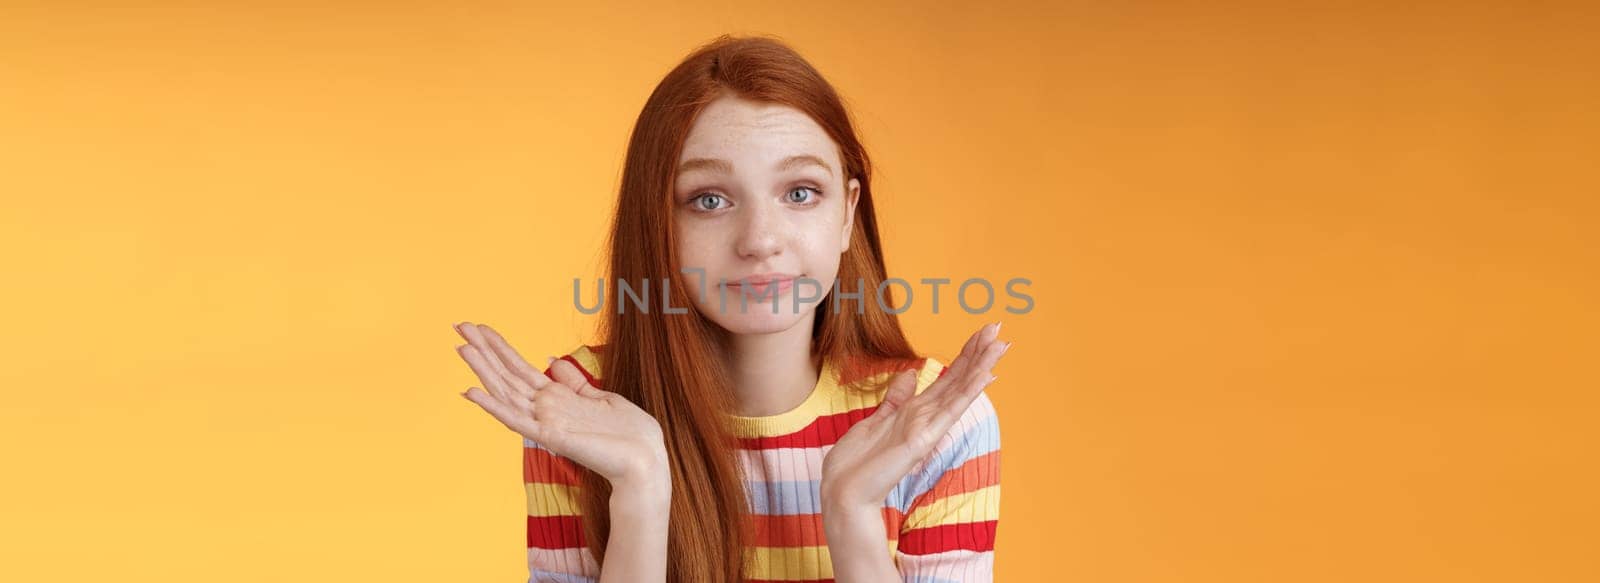 Clueless unbothered young redhead silly european girl 20s shrugging hands spread sideways smirking sorry cannot answer standing unaware confused puzzled give reply, orange background.